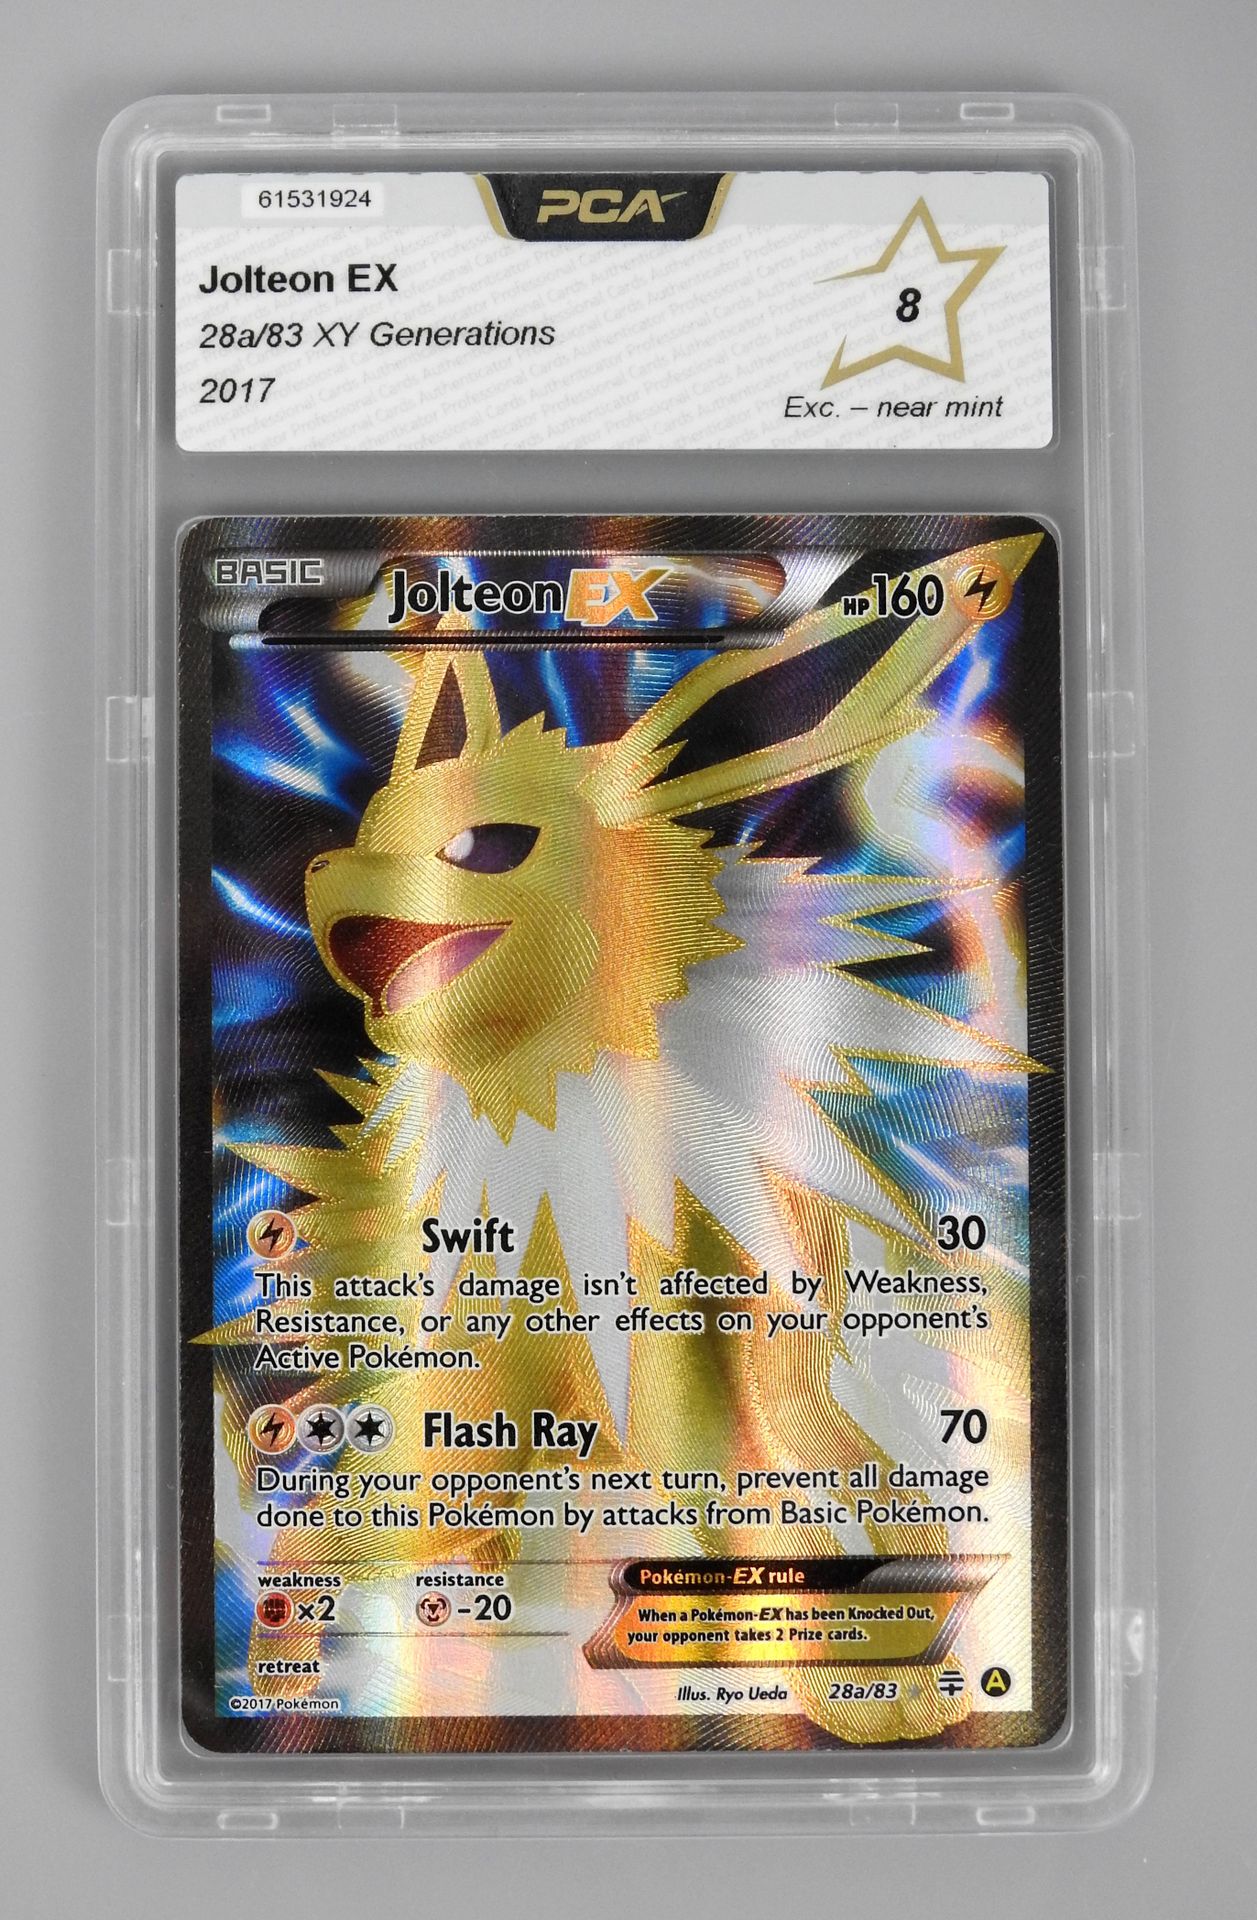 Null JOLTEON EX

Block XY Generations 28a/83 US

Pokémon card rated PCA 8/10